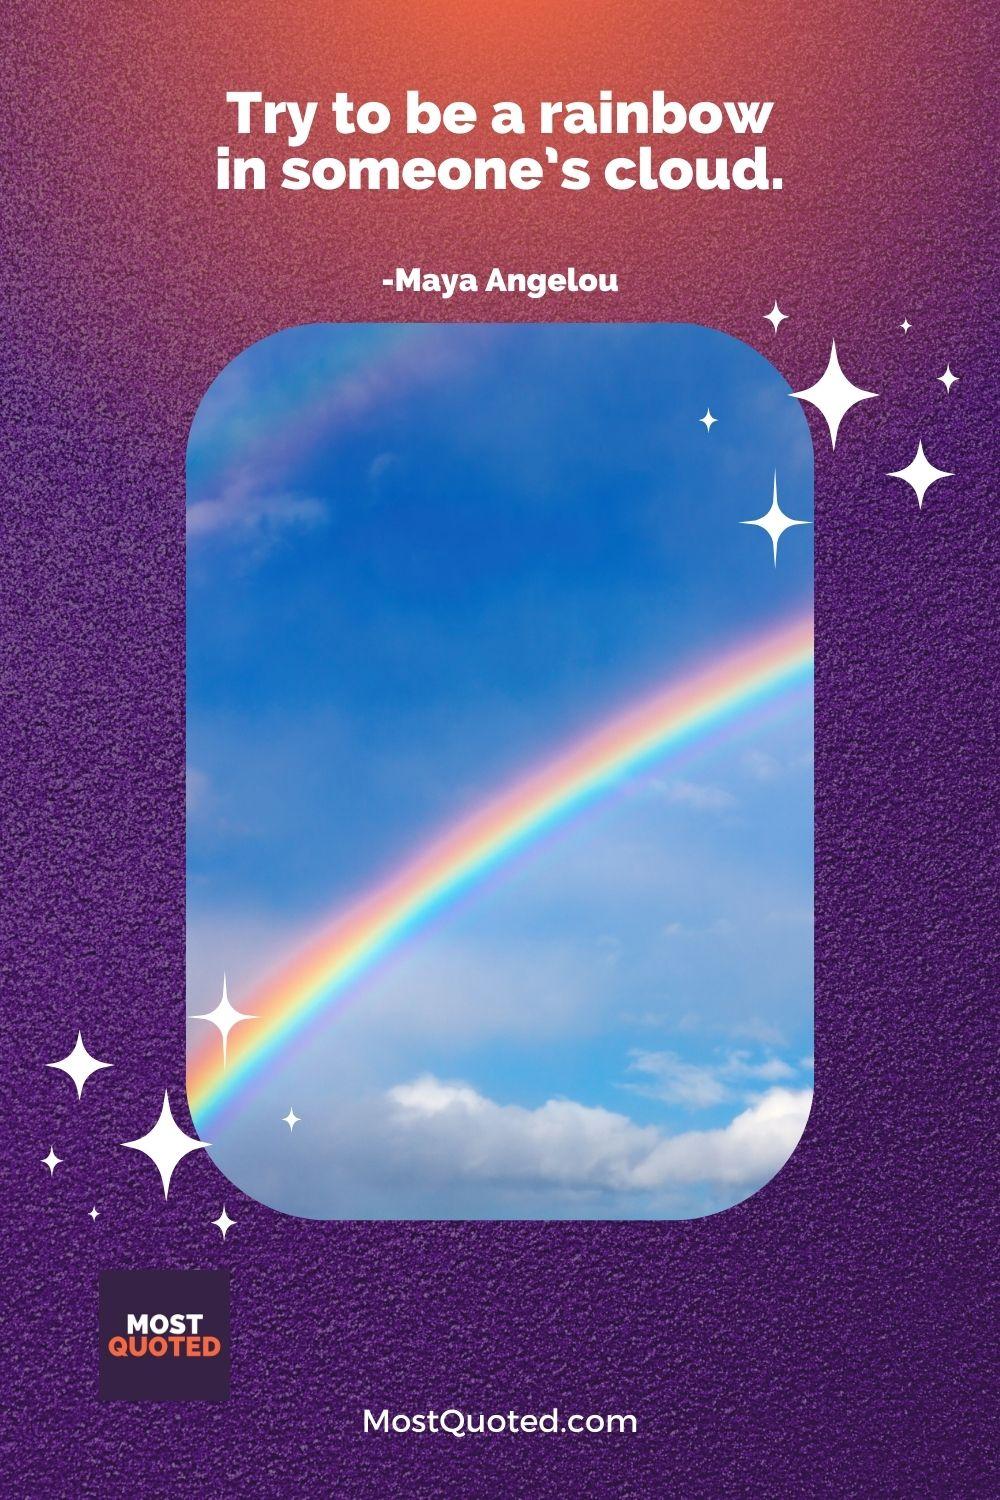 Try to be a rainbow in someone’s cloud. - Maya Angelou